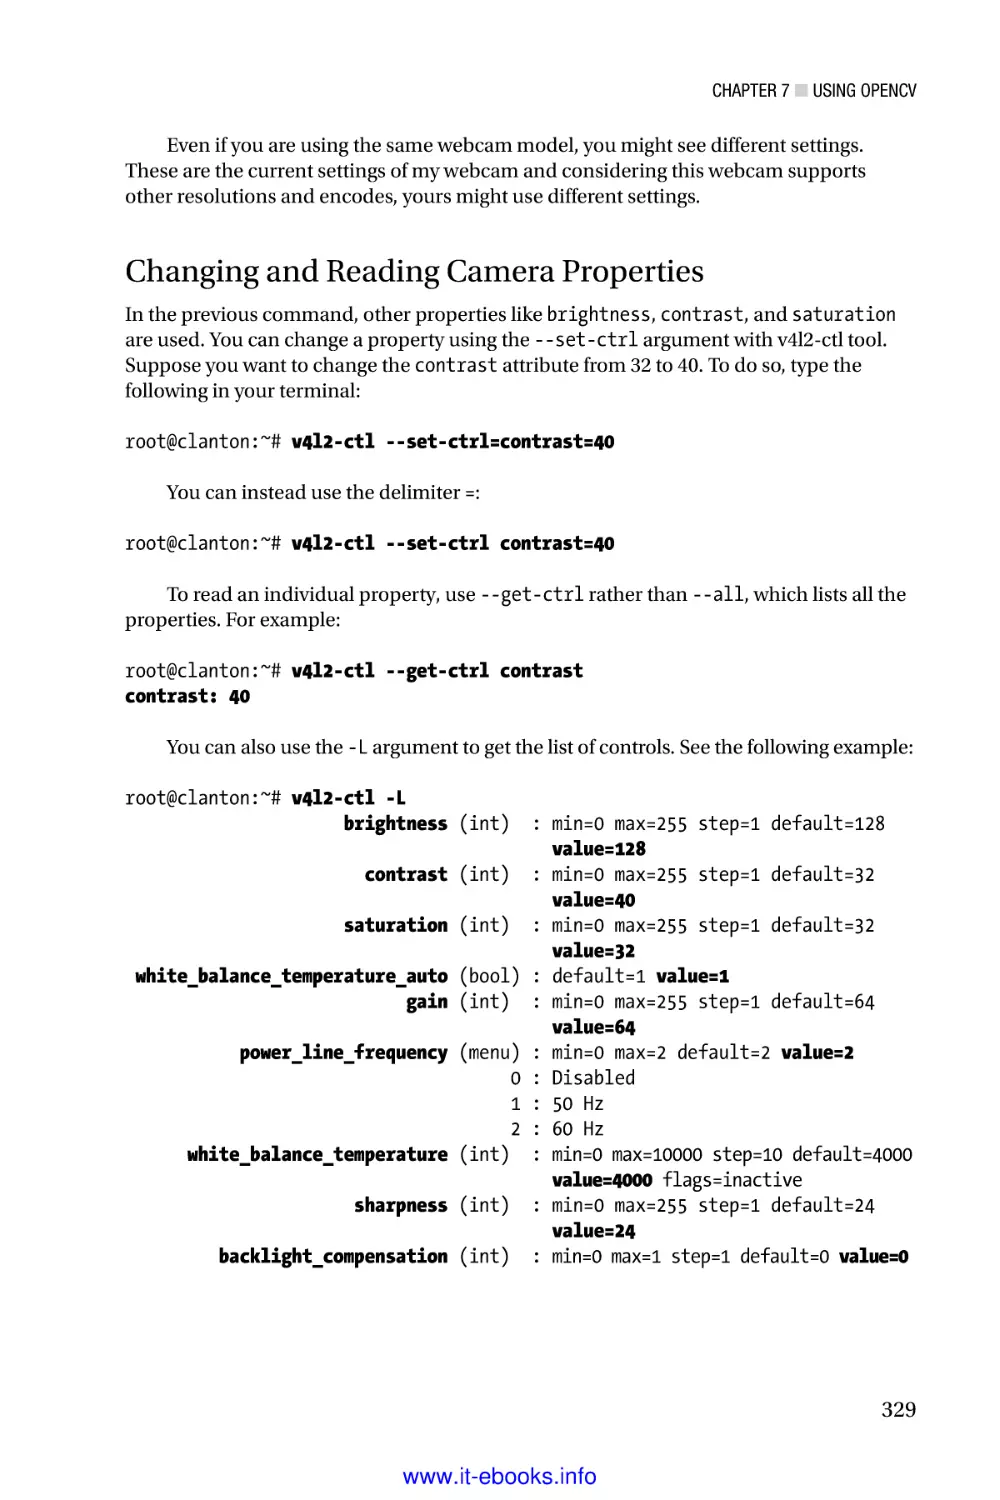 Changing and Reading Camera Properties